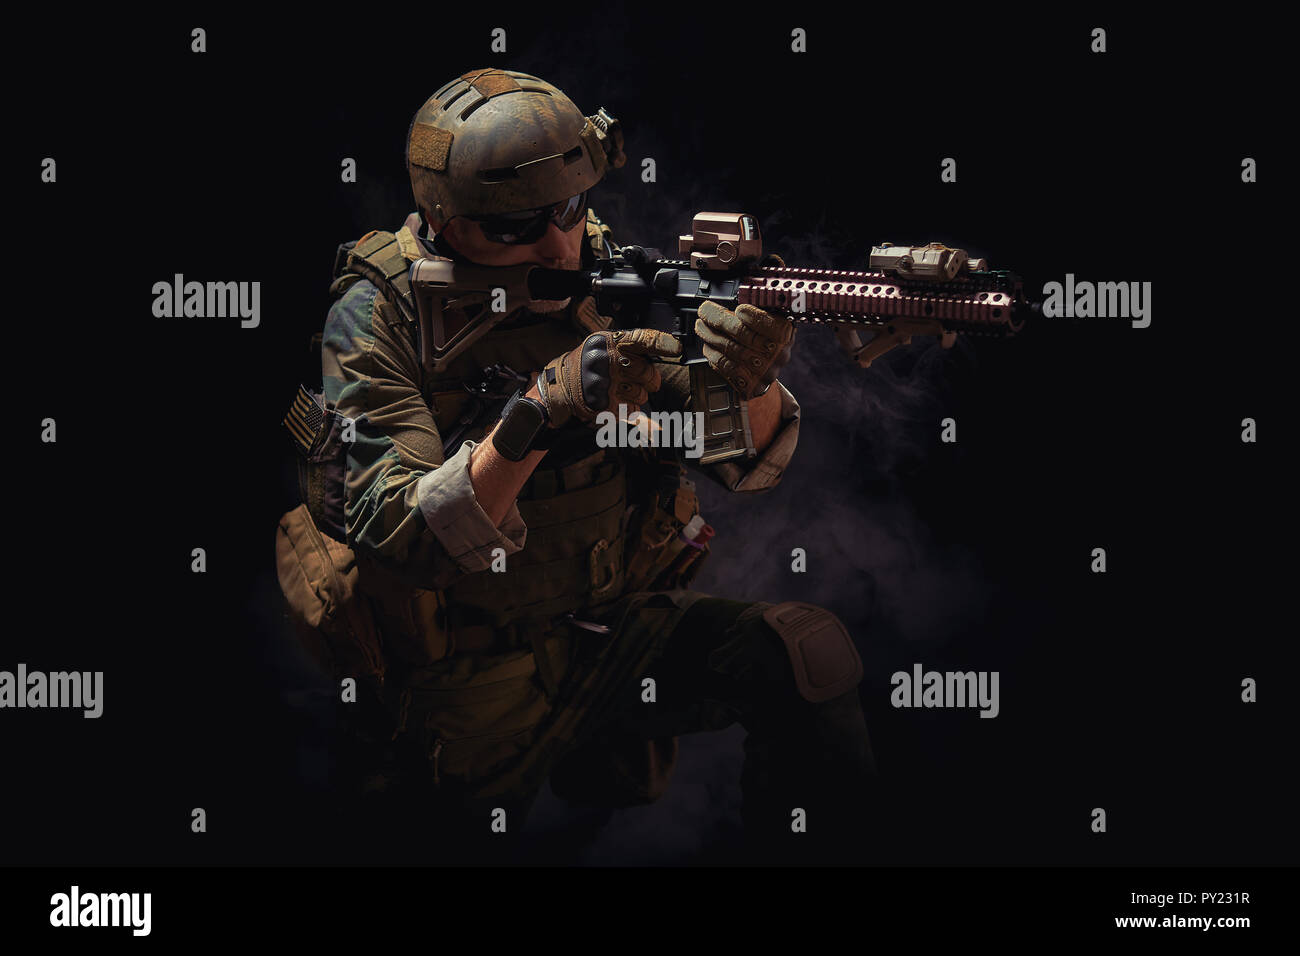 special forces soldier of the united states poses with a rifle on a black background Stock Photo